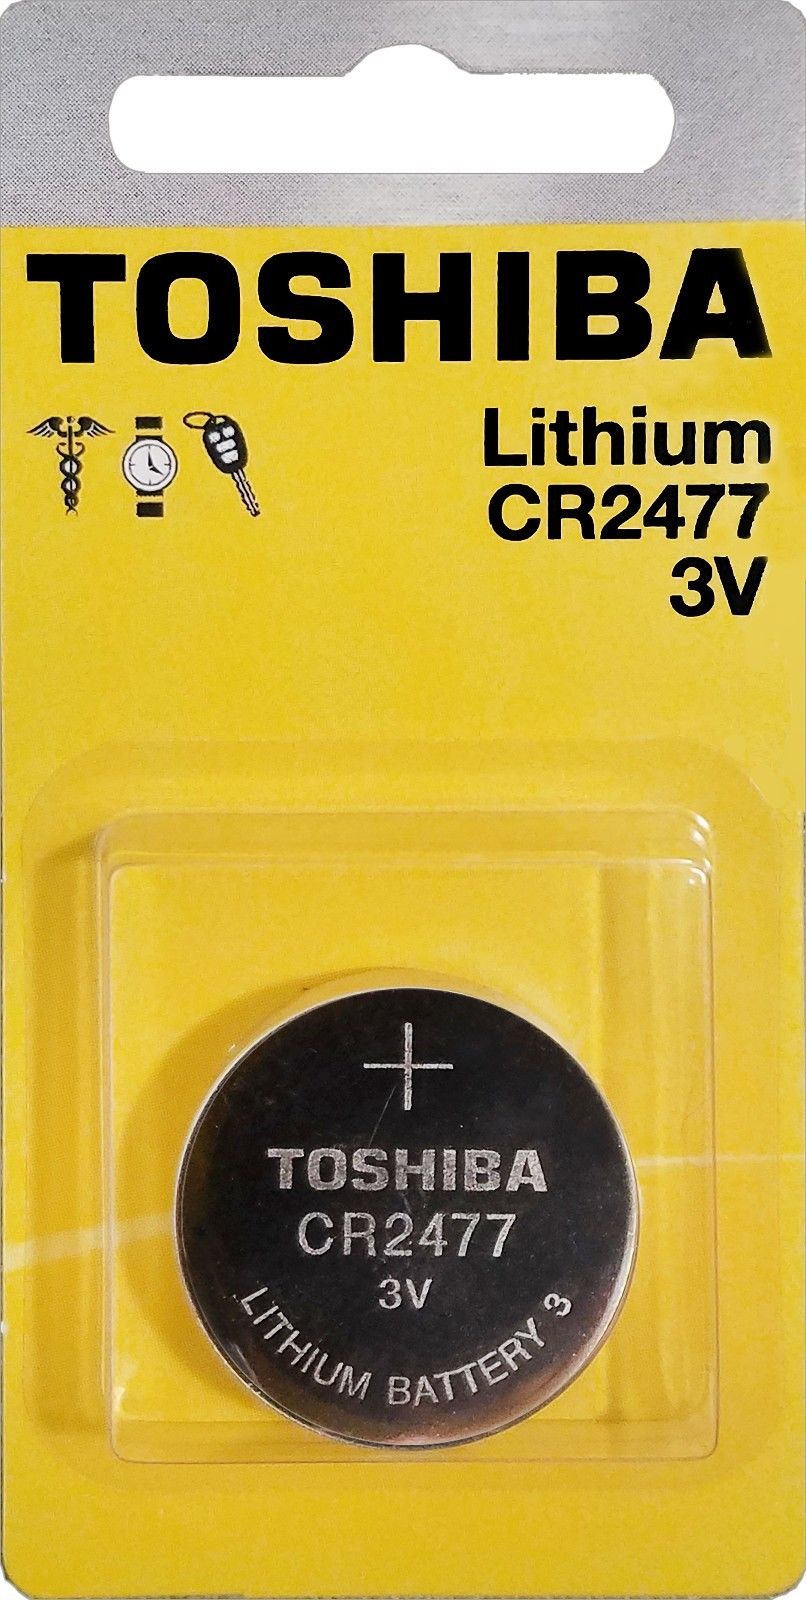 Toshiba CR2477 Battery Lithium Coin Cell (1PC Retail Pack)